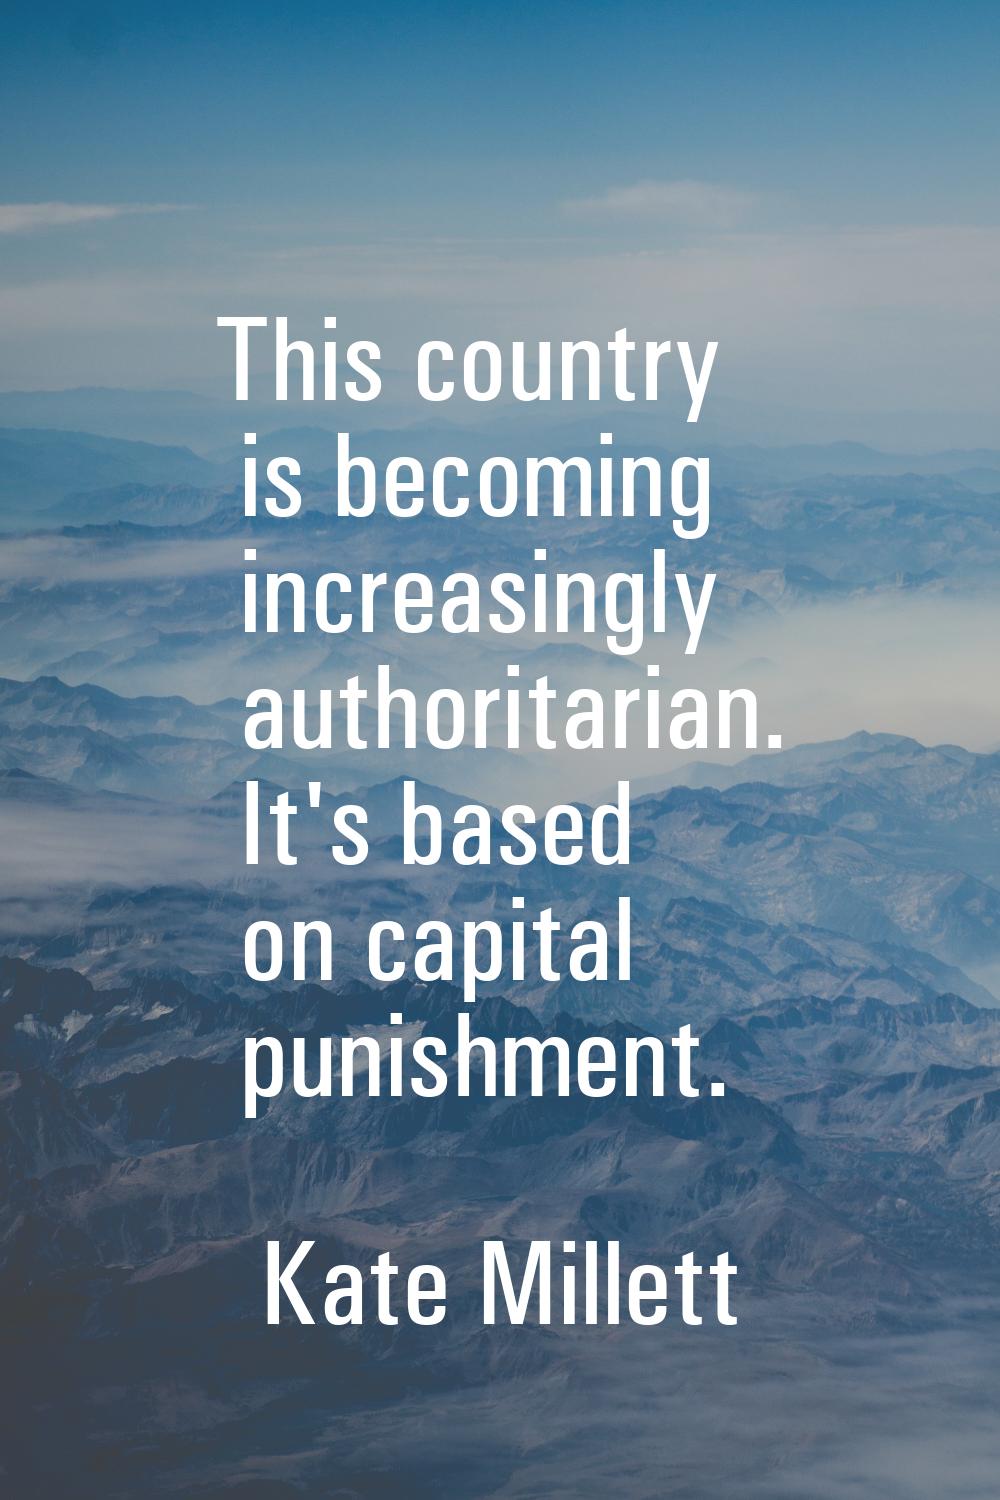 This country is becoming increasingly authoritarian. It's based on capital punishment.